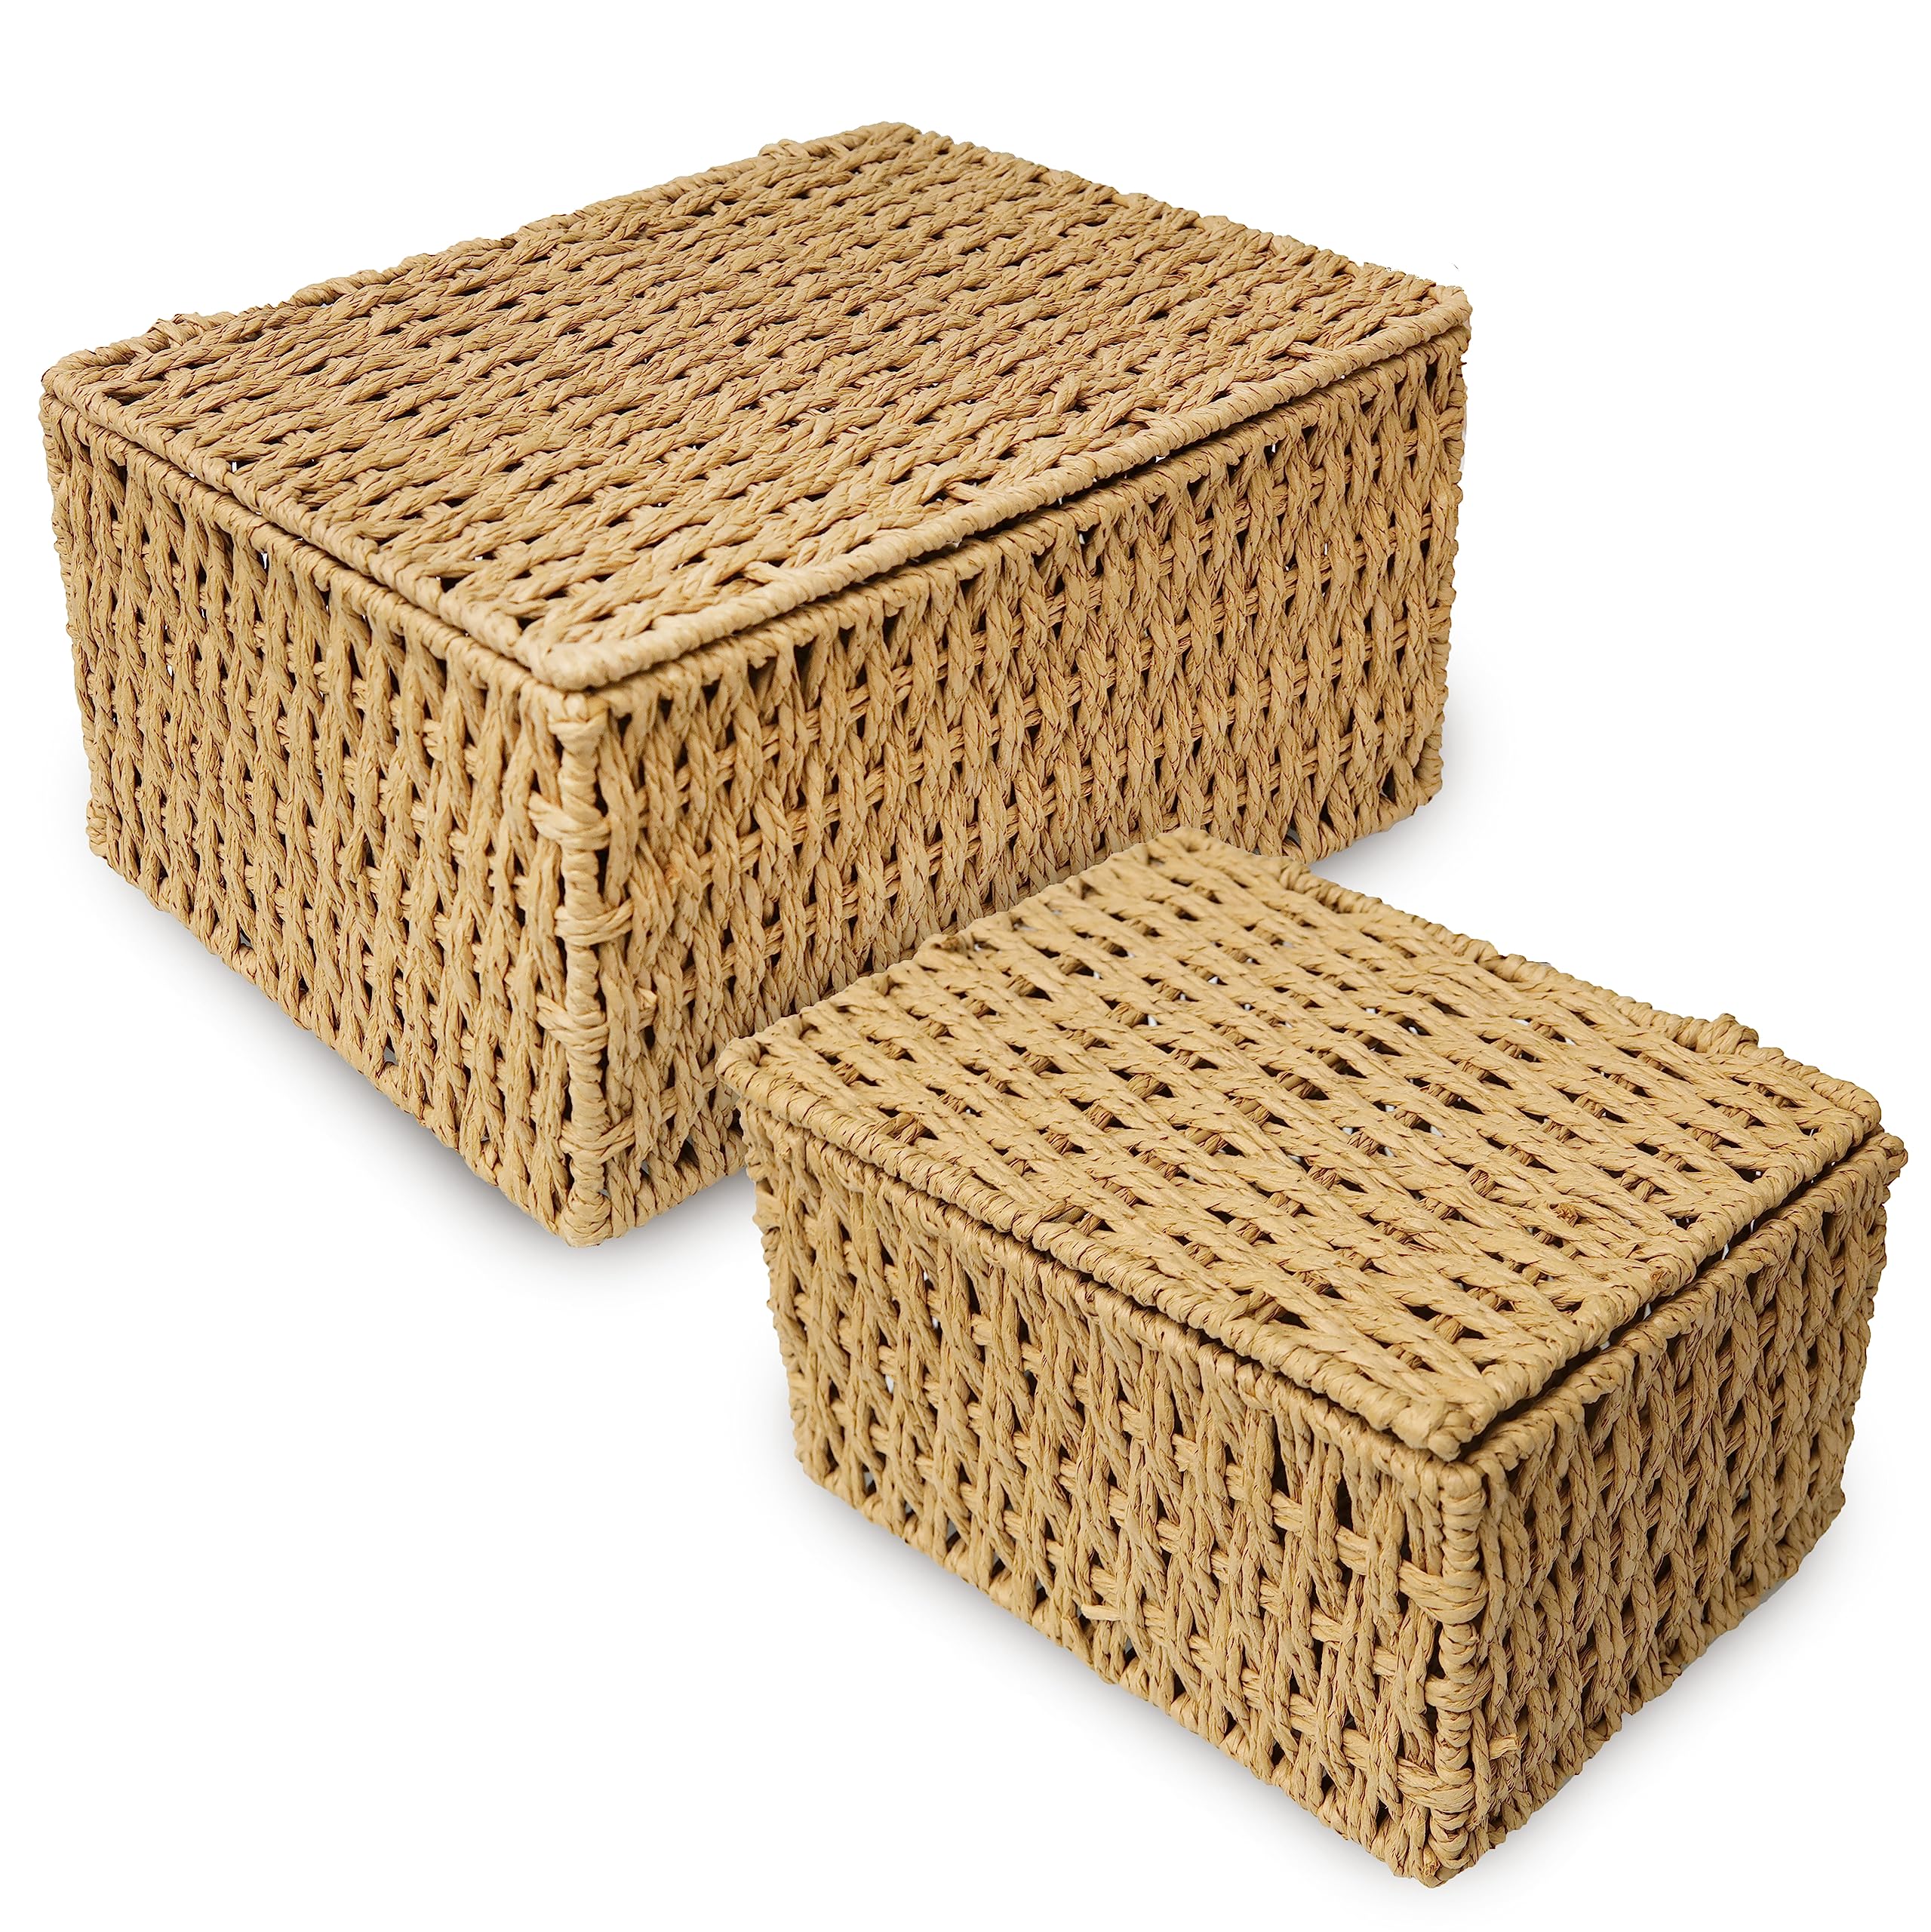 RoyalHouse Woven Stackable Storage Baskets with Lid, Decorative Rope Organizer Bin - Set of 2 (2 Sizes), Beige (No Liner)